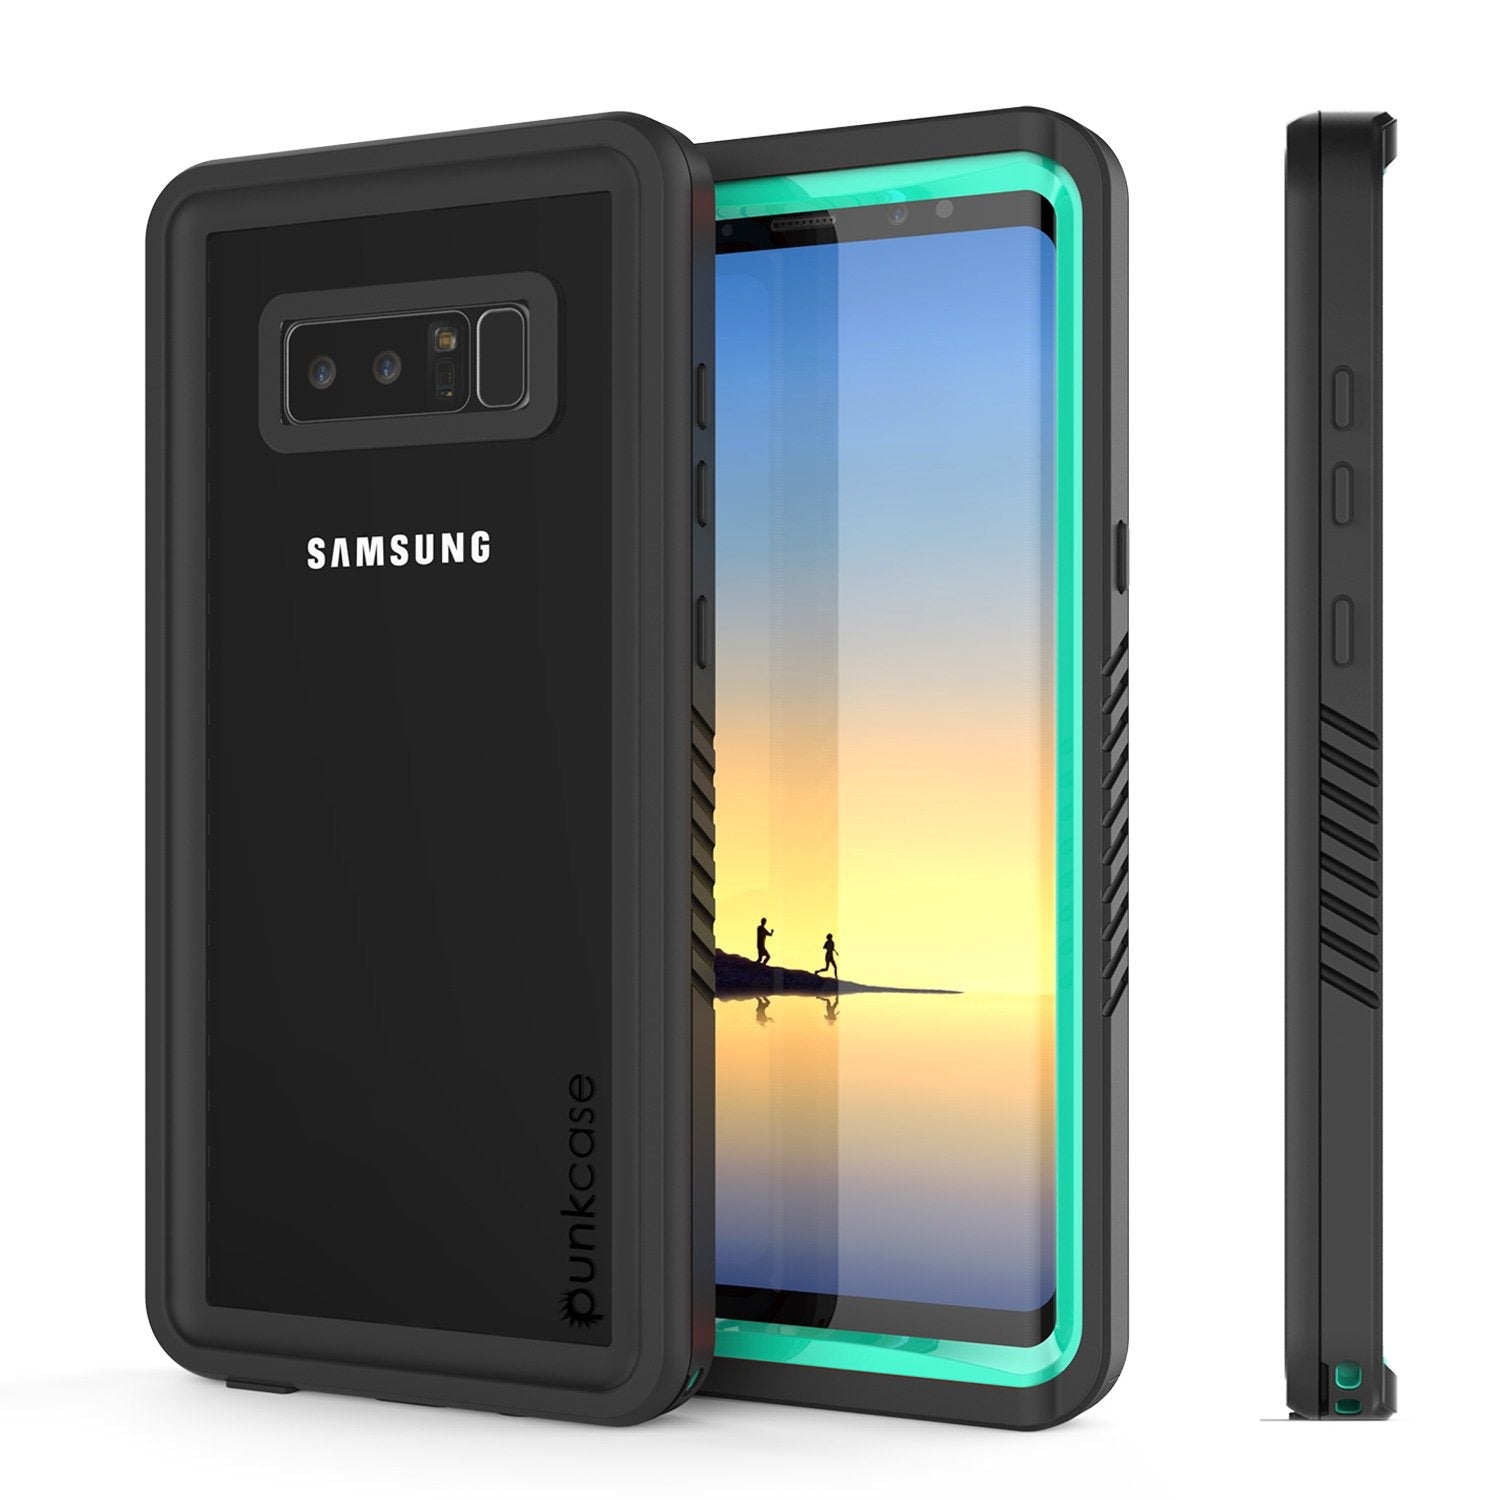 Galaxy Note 8 Case, Punkcase [Extreme Series] [Slim Fit] [IP68 Certified] [Shockproof] Armor Cover W/ Built In Screen Protector [Teal] (Color in image: Teal)